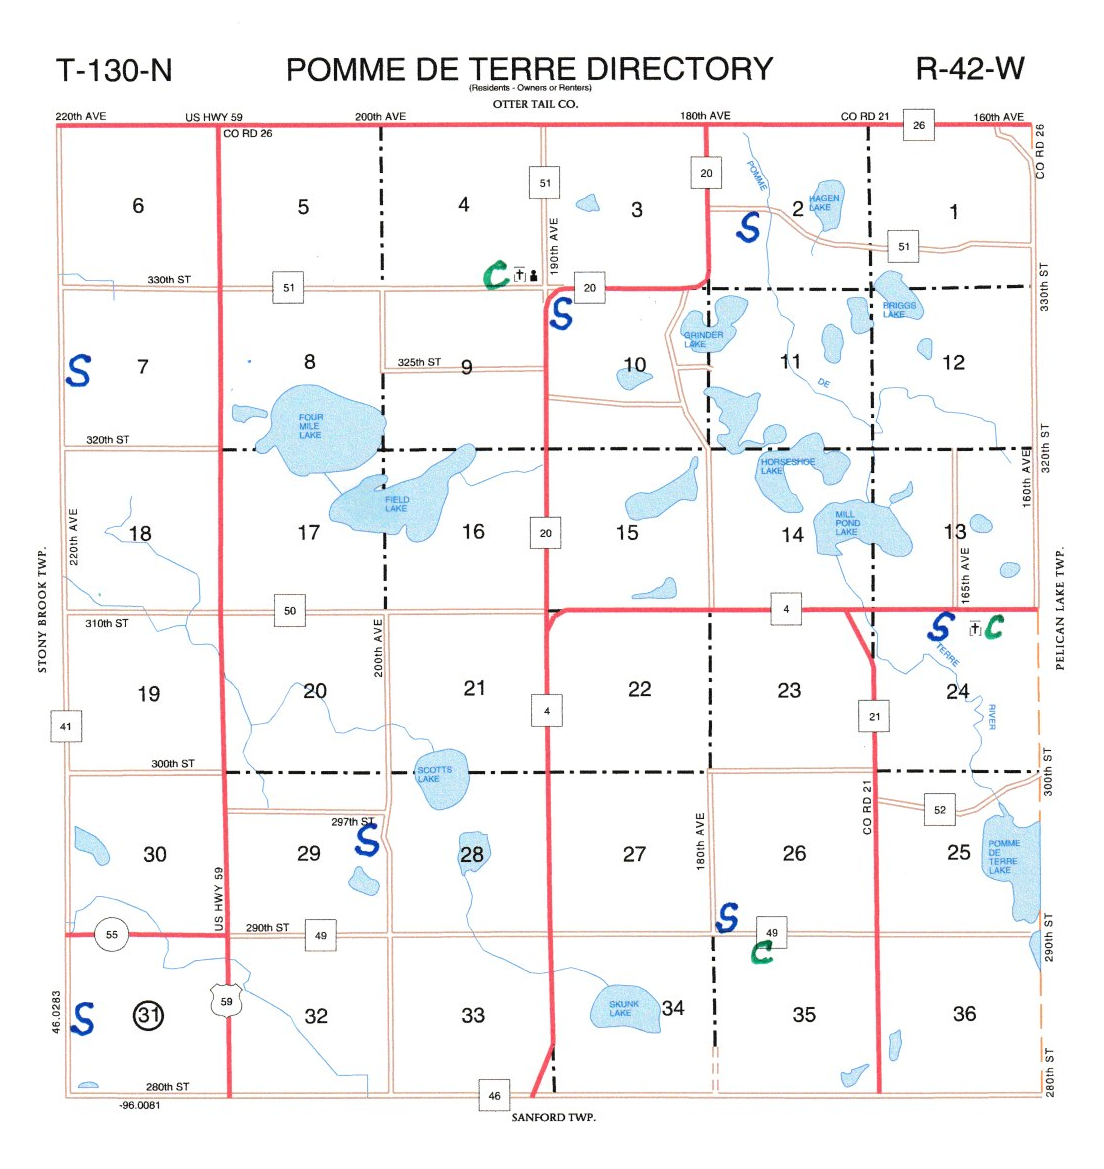 Map of Pomme de Terre township showing schools and cemeteries